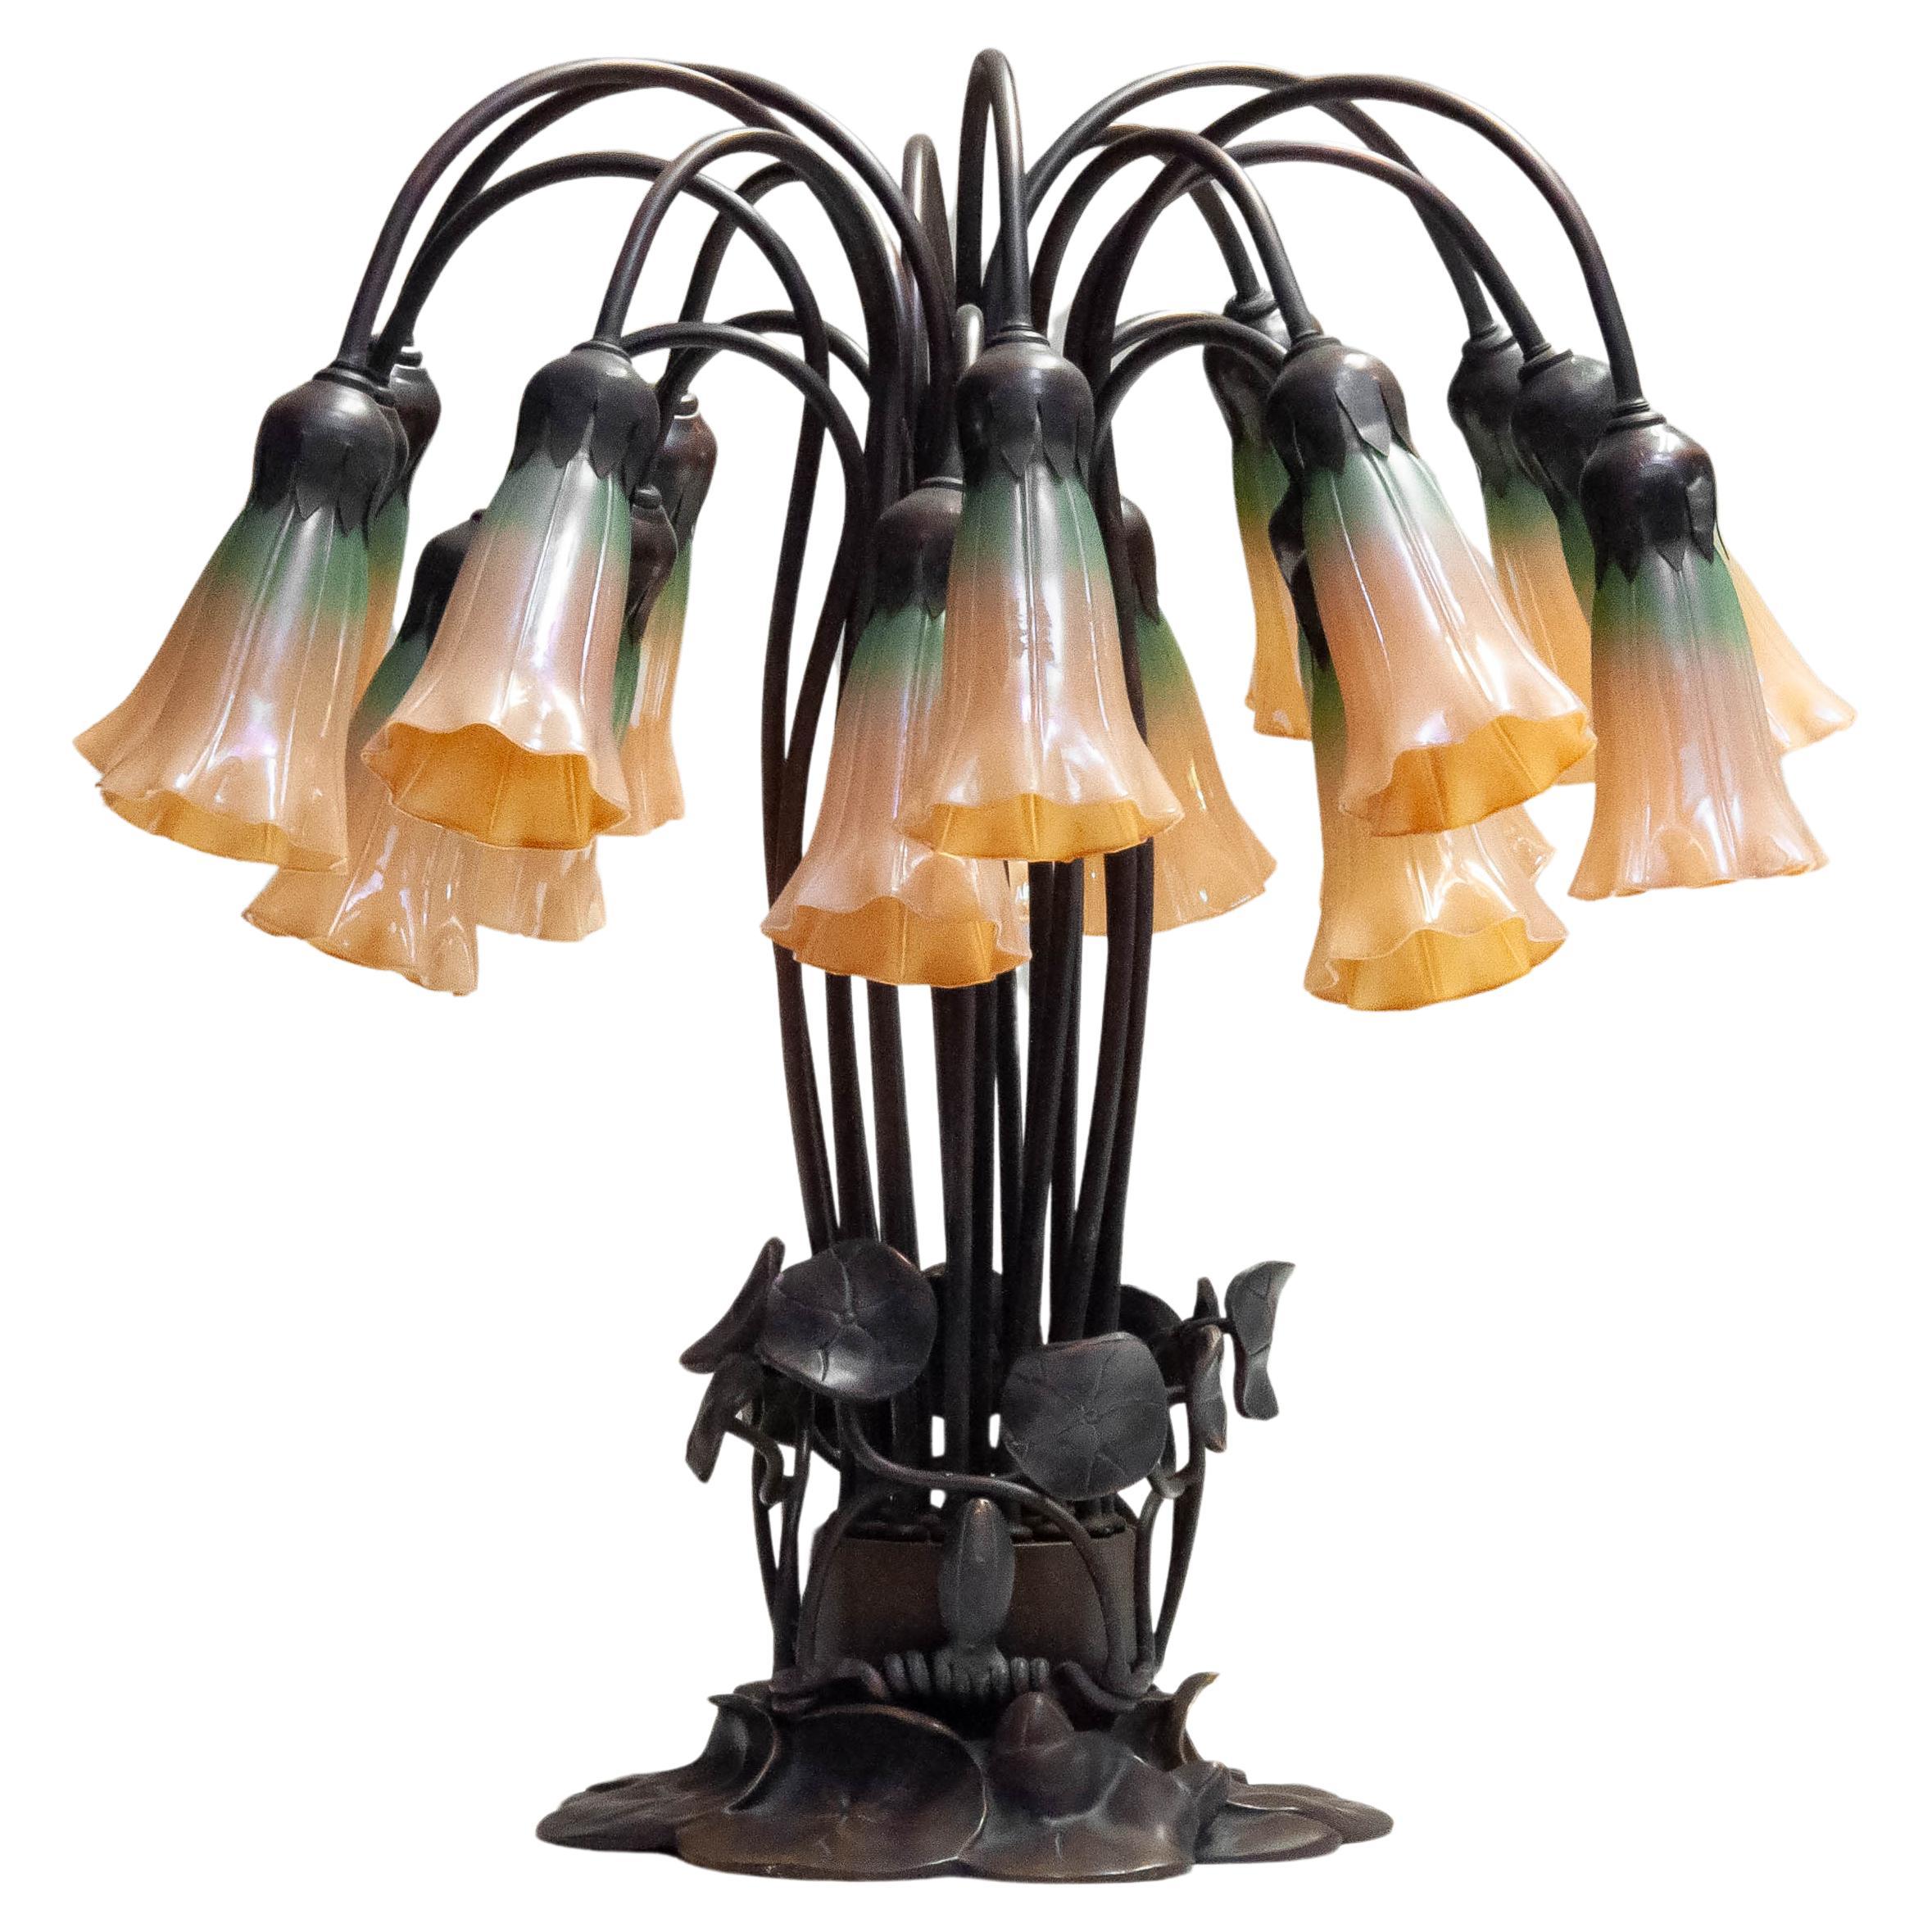 1980s In The Manner Of Tiffany 'Lilly' Table Lamp Bronze And 18 Art Glass Shades For Sale